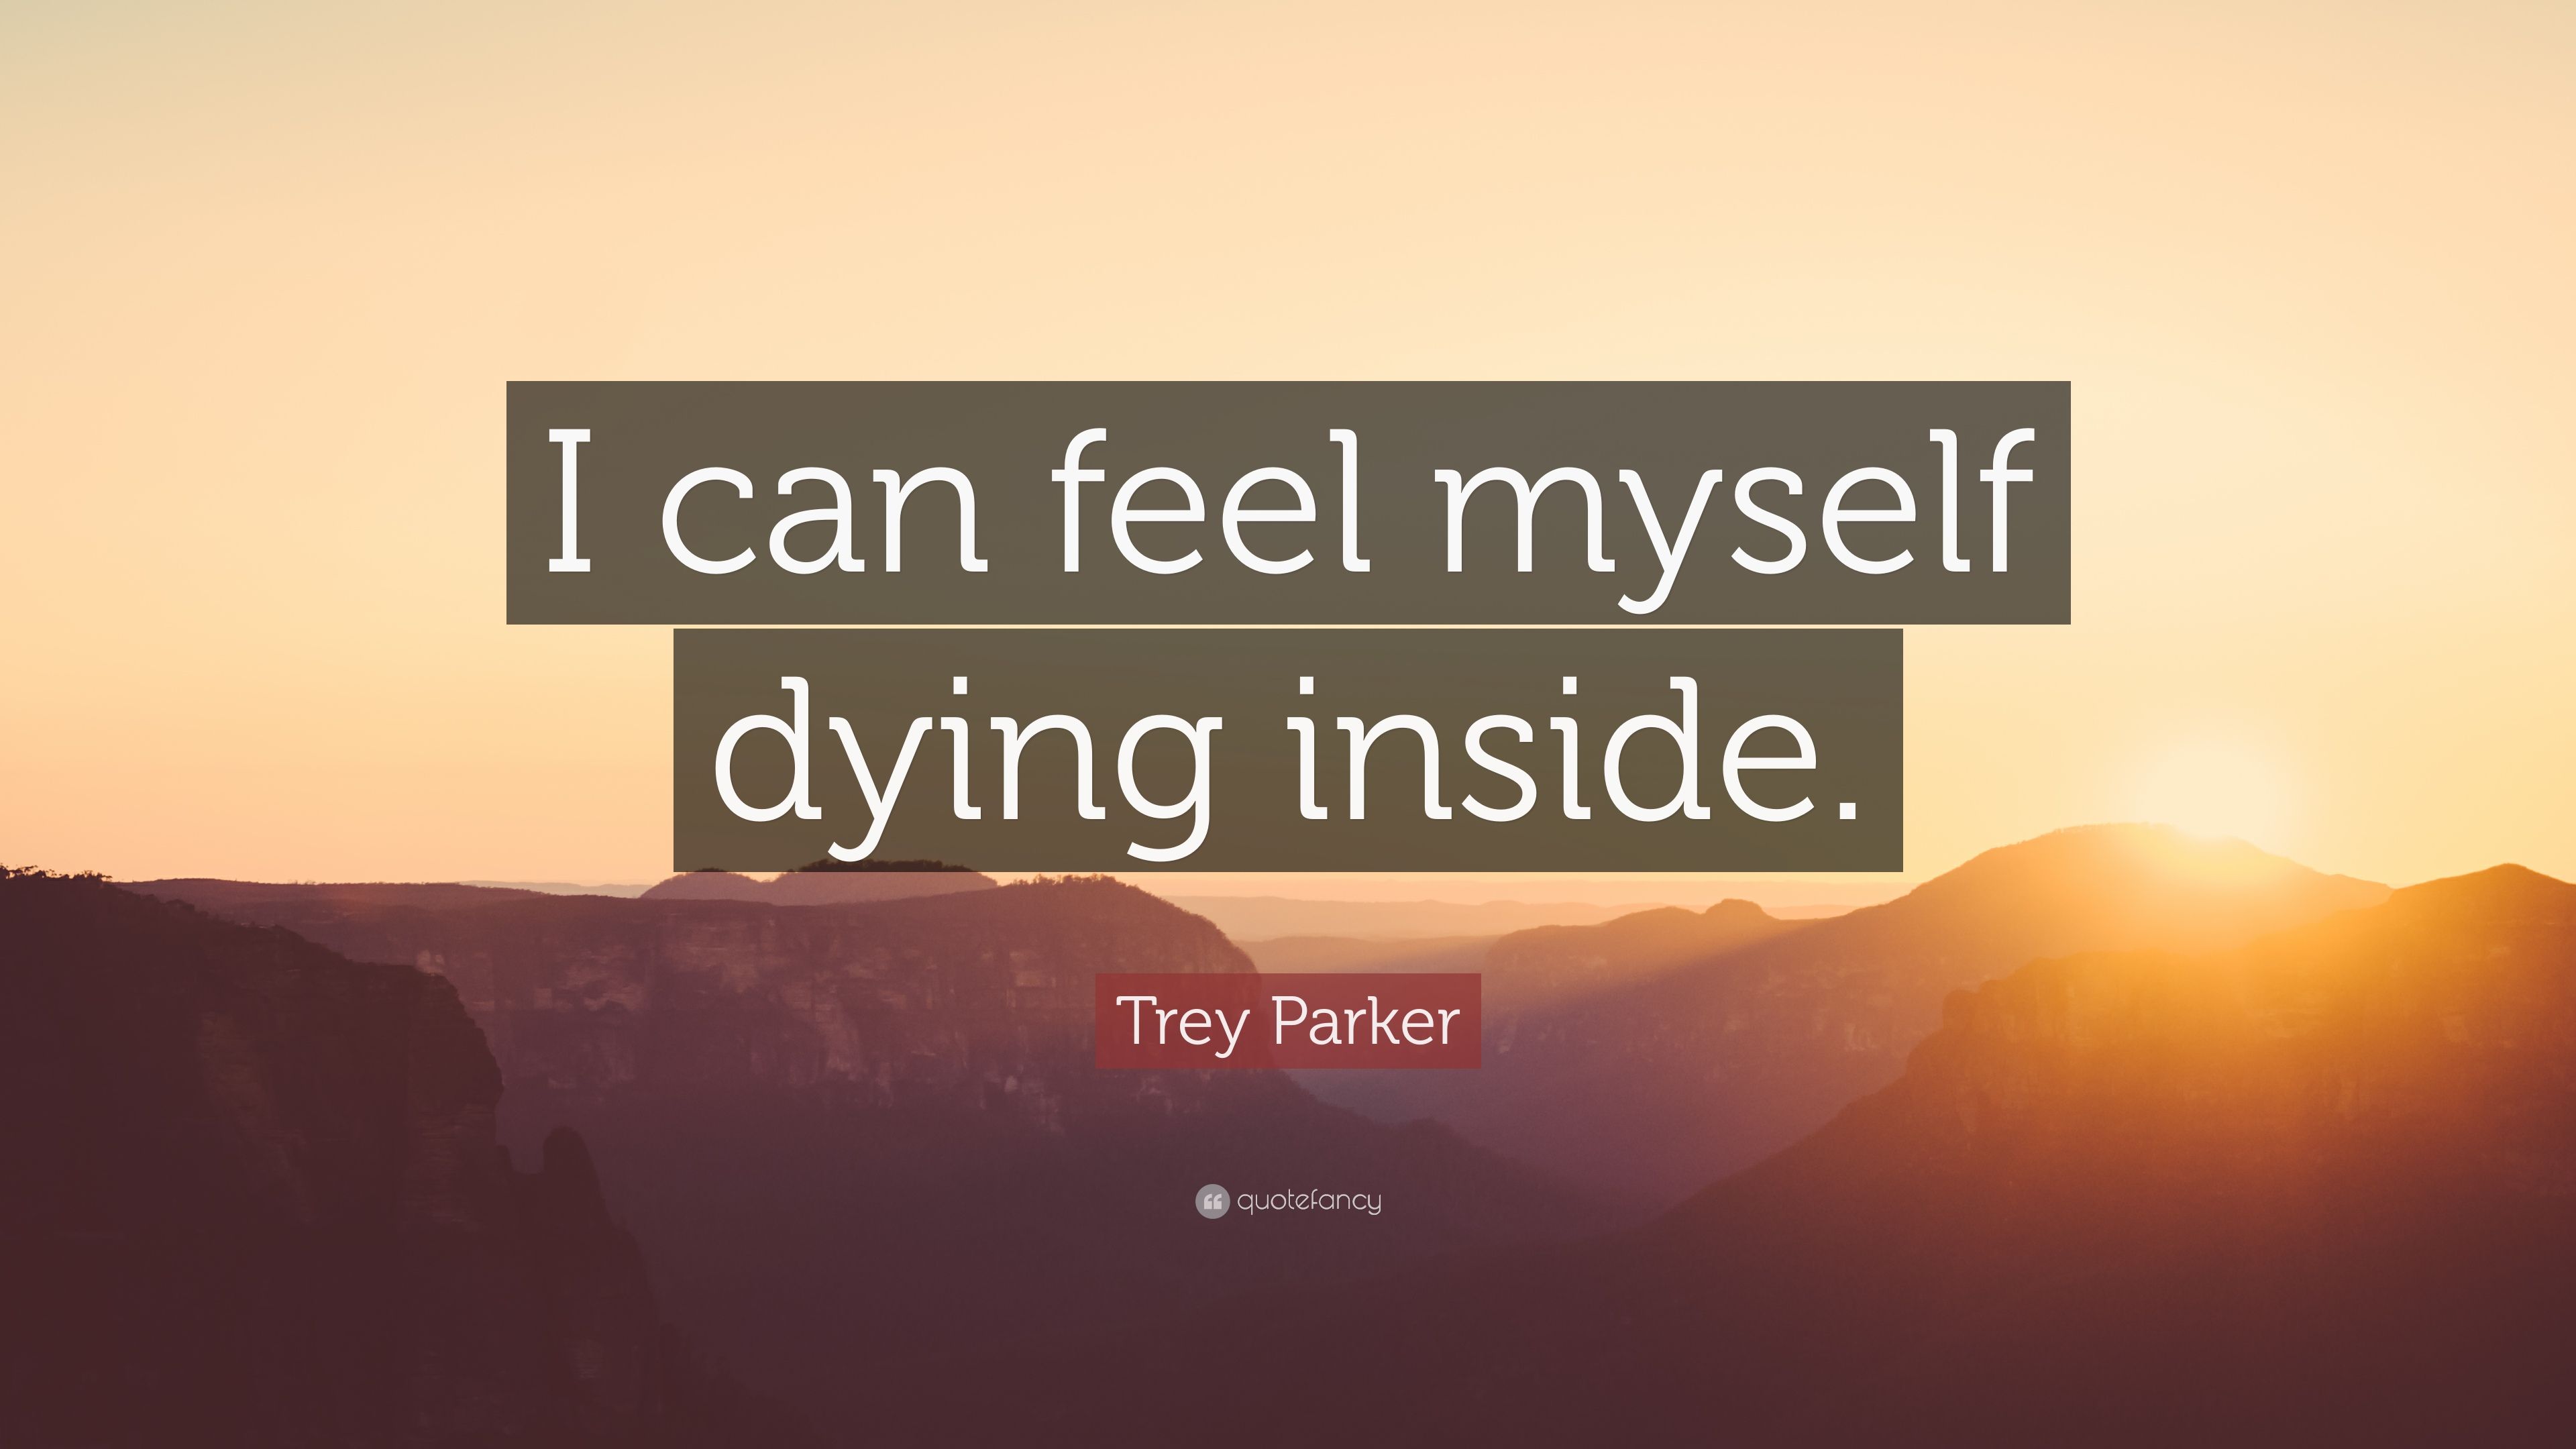 Trey Parker Quote: “I can feel myself dying inside.” (12 wallpaper)